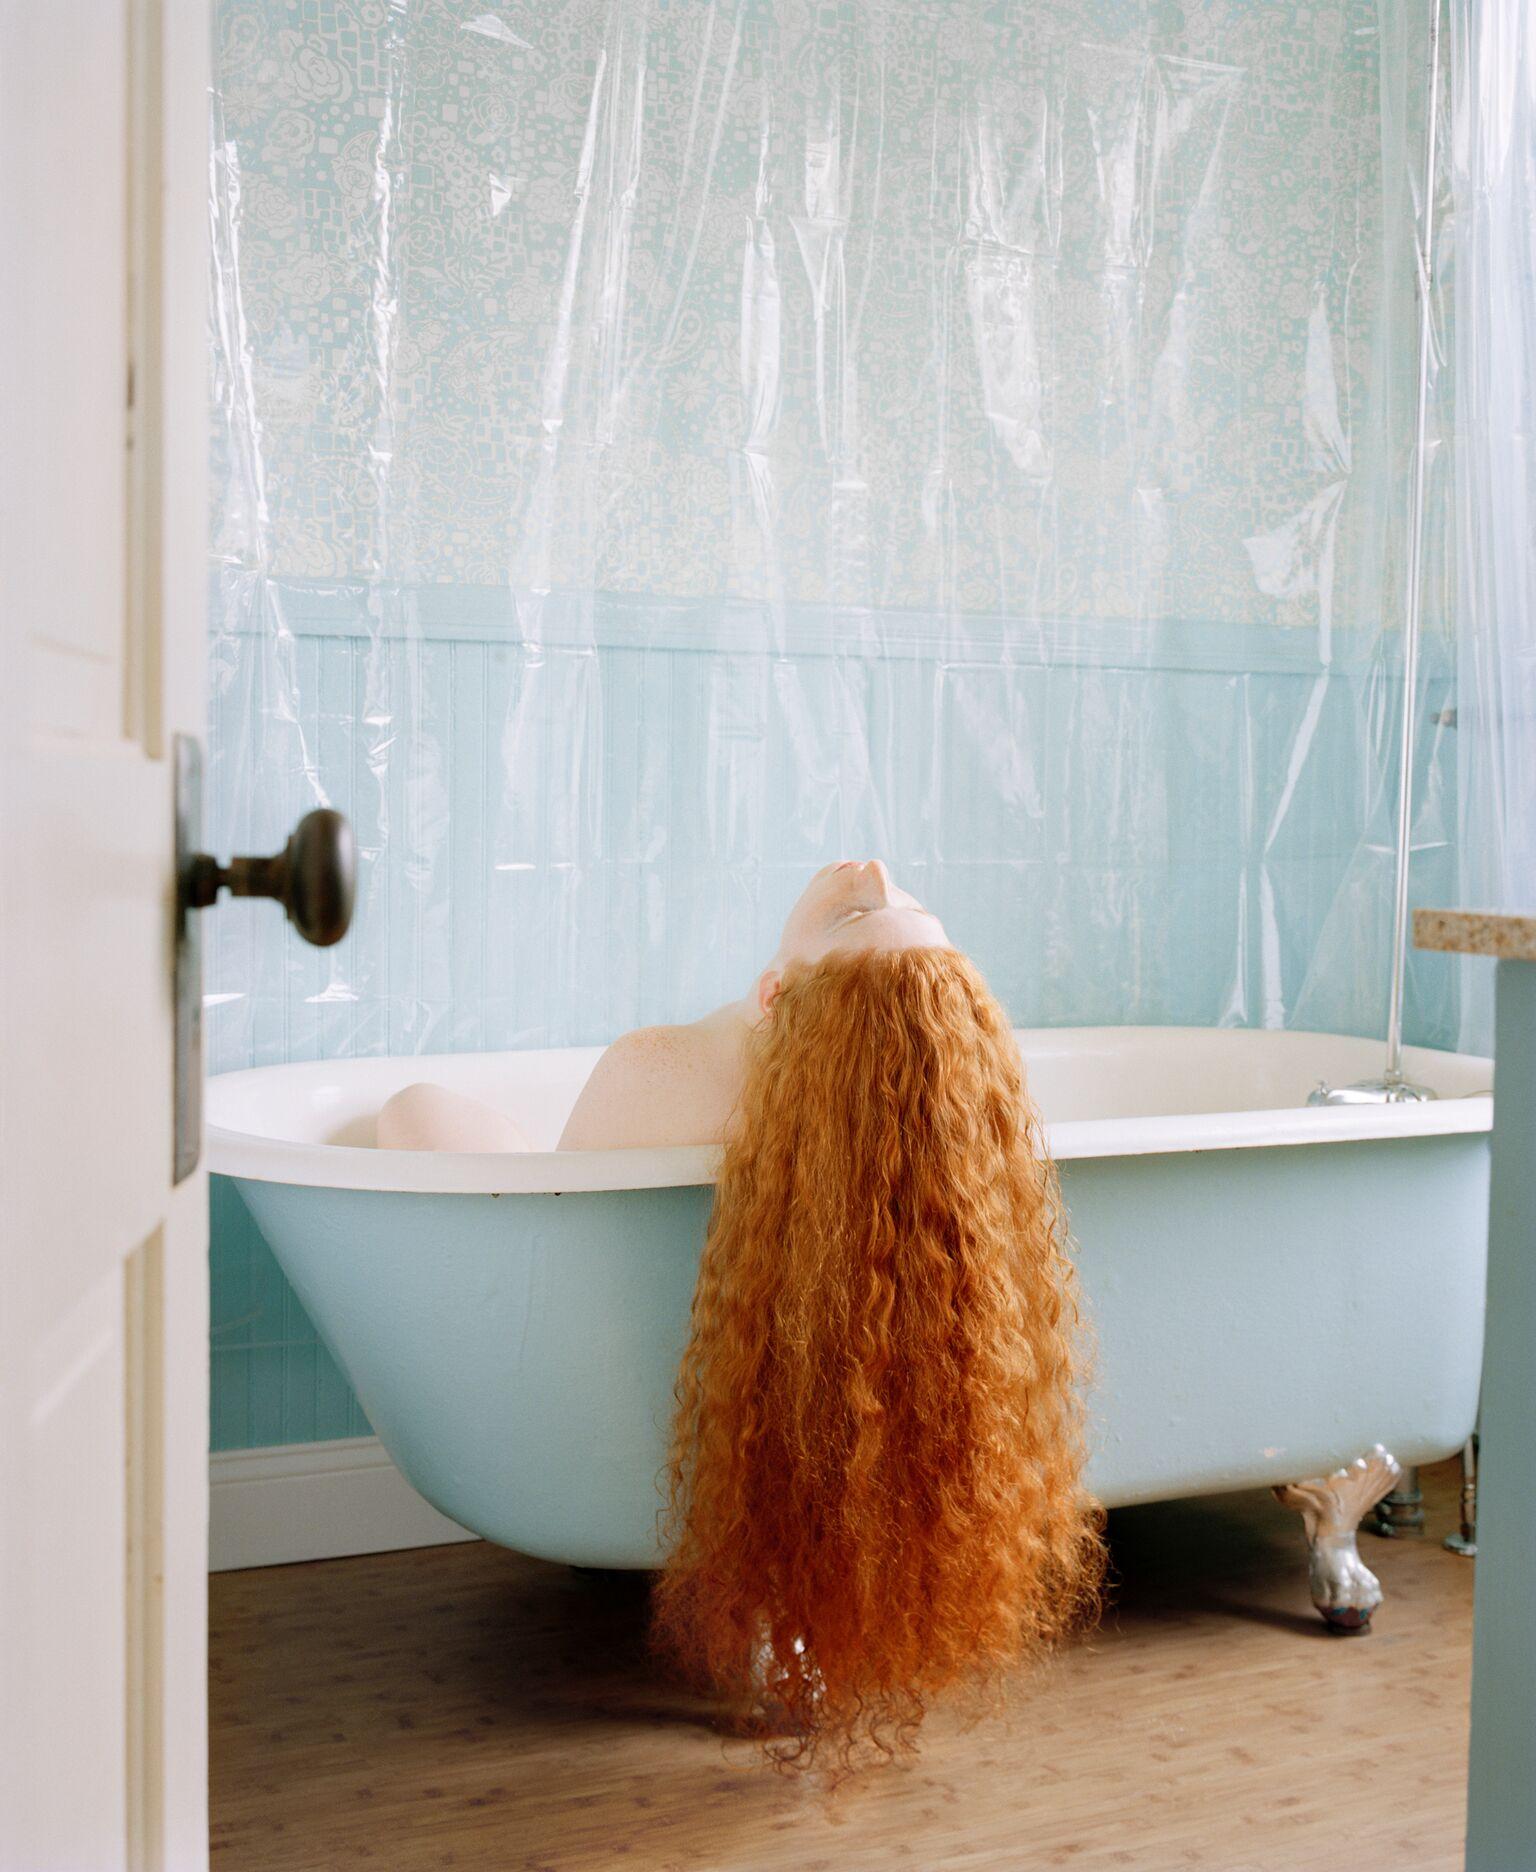 The Bath, 2016 - Jocelyn Lee (Colour Photography)
Signed, dated and inscribed with title on reverse
Archival pigment print
30 x 40 inches
From an edition of 5

Throughout her career, Jocelyn Lee (born 1962) has utilised portraiture as a tool to